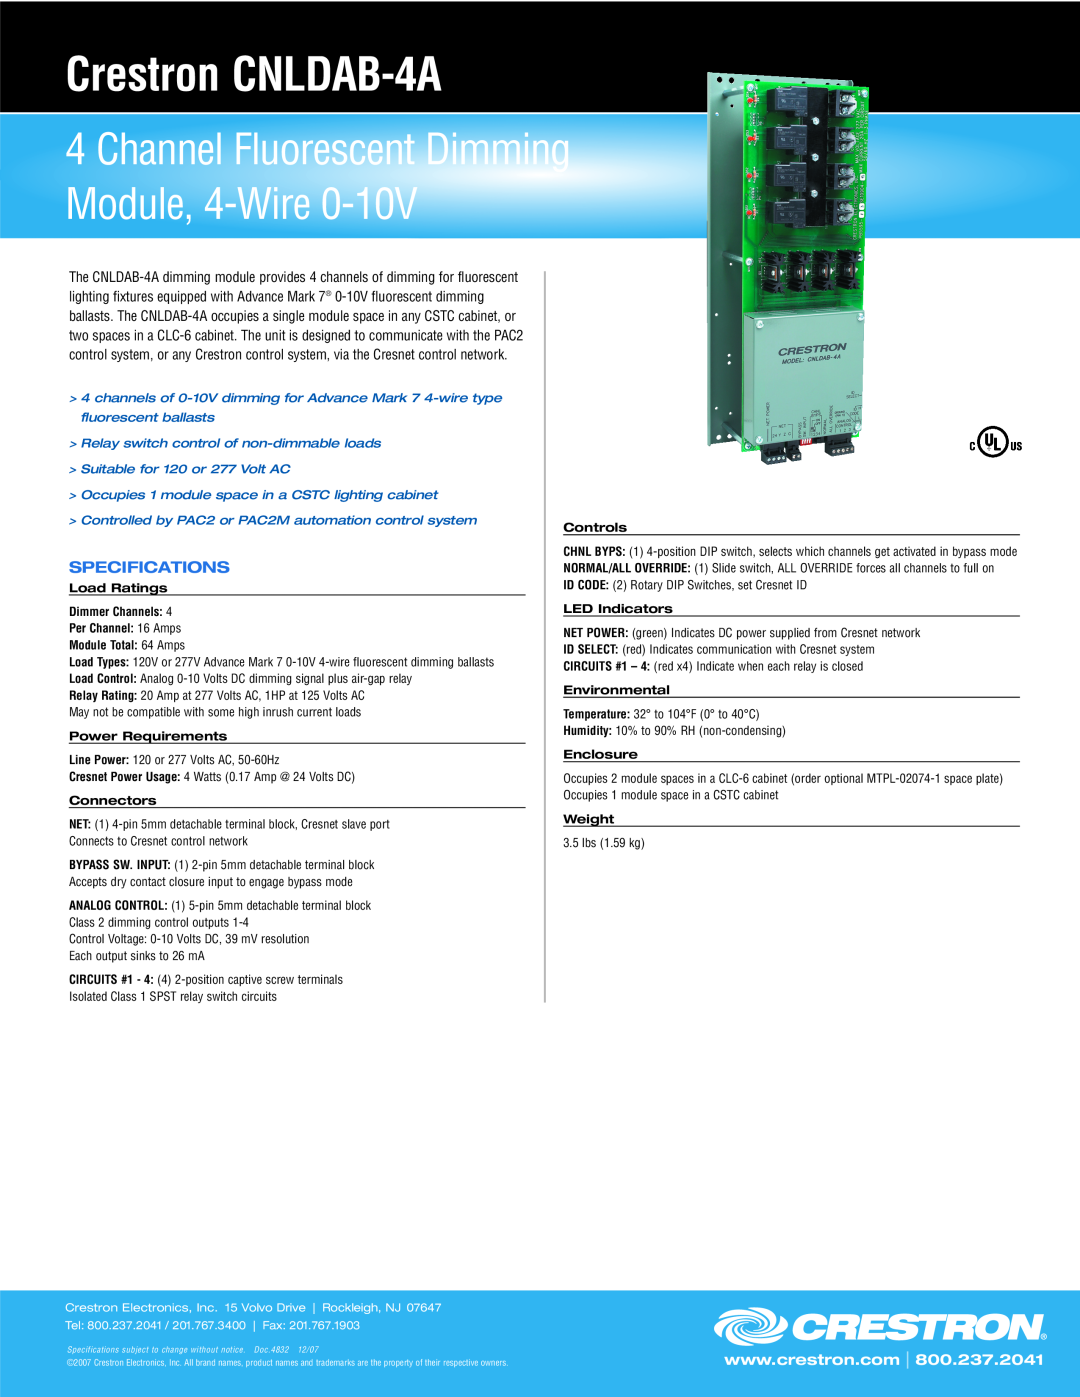 Crestron electronic specifications Crestron CNLDAB-4A, Channel Fluorescent Dimming Module, 4-Wire, Specifications 